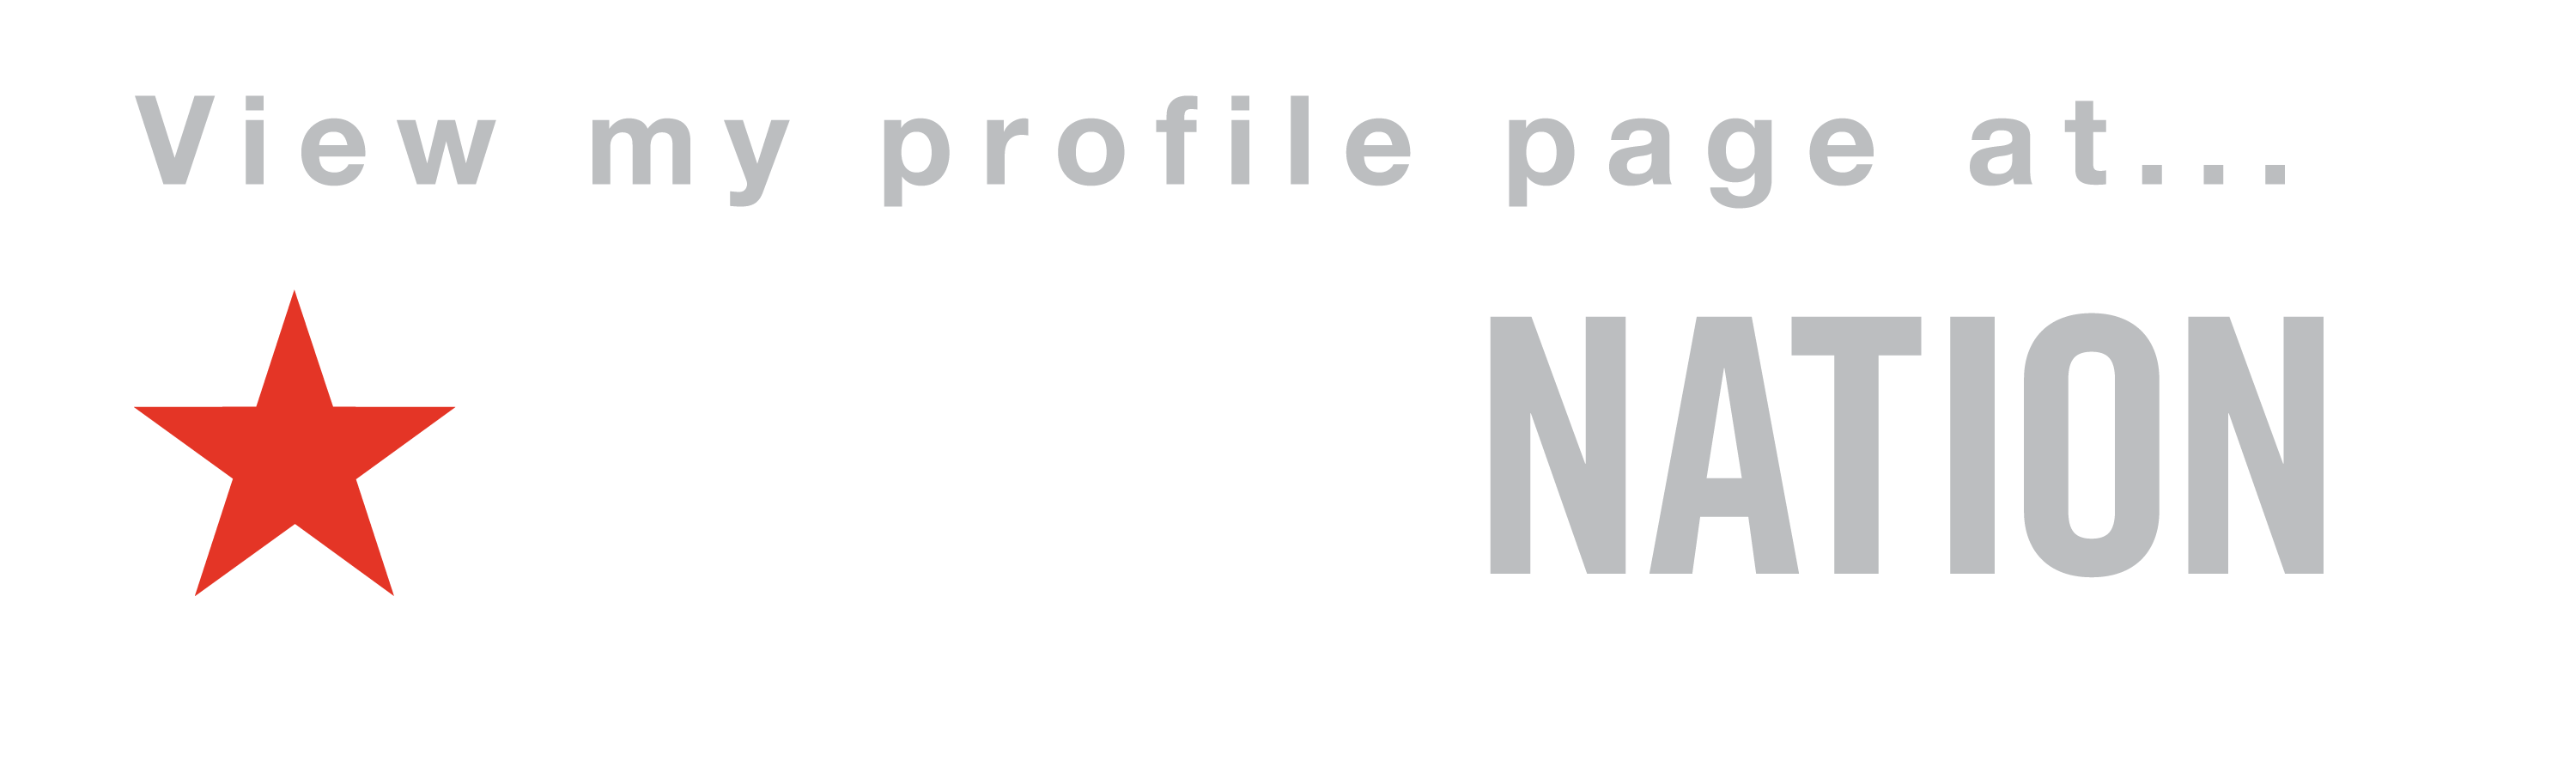 Reverb Nation Profile Page